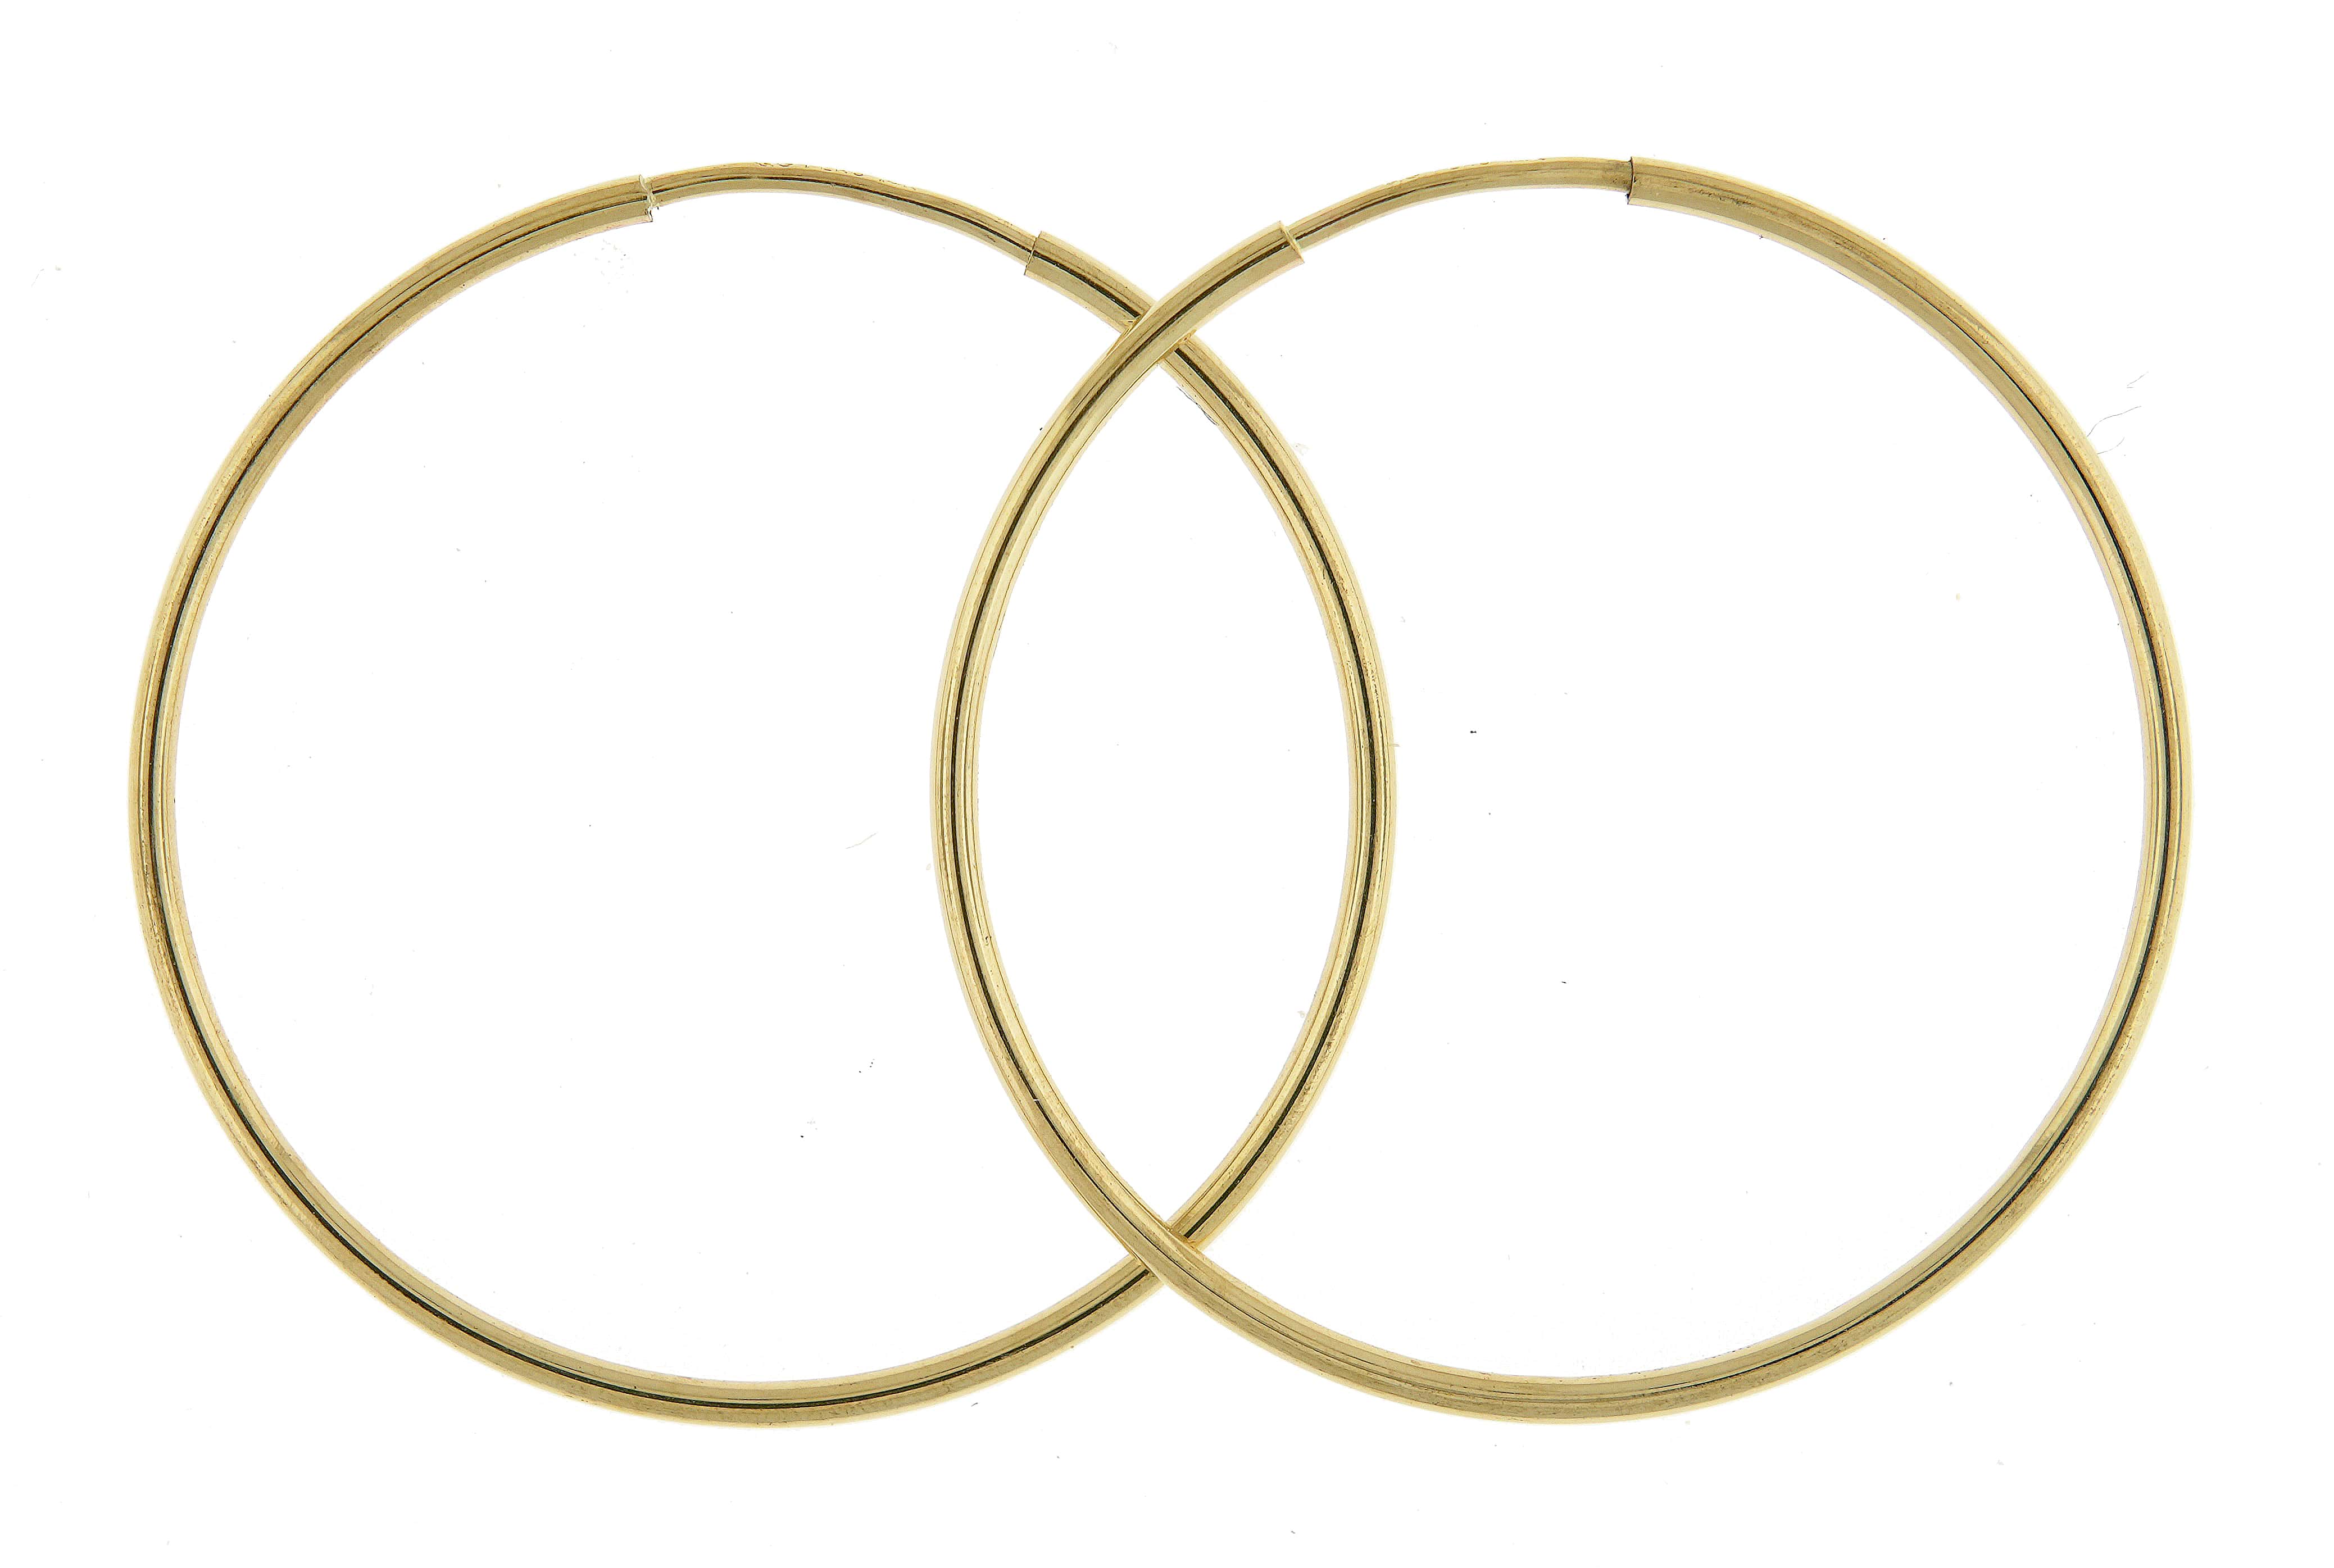 14K Yellow Gold 27mm x 1.25mm Round Endless Hoop Earrings